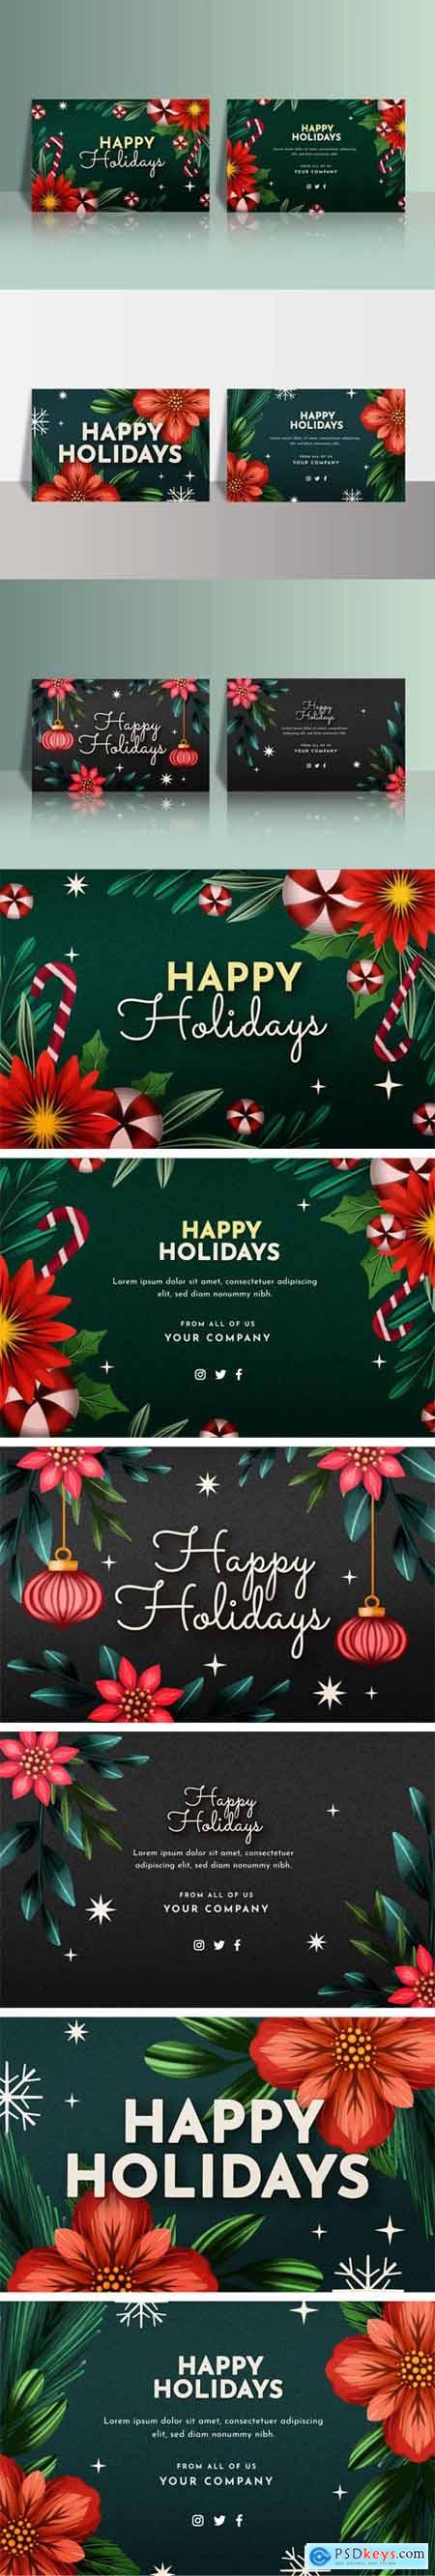 Happy Holidays Business Card Vector Templates